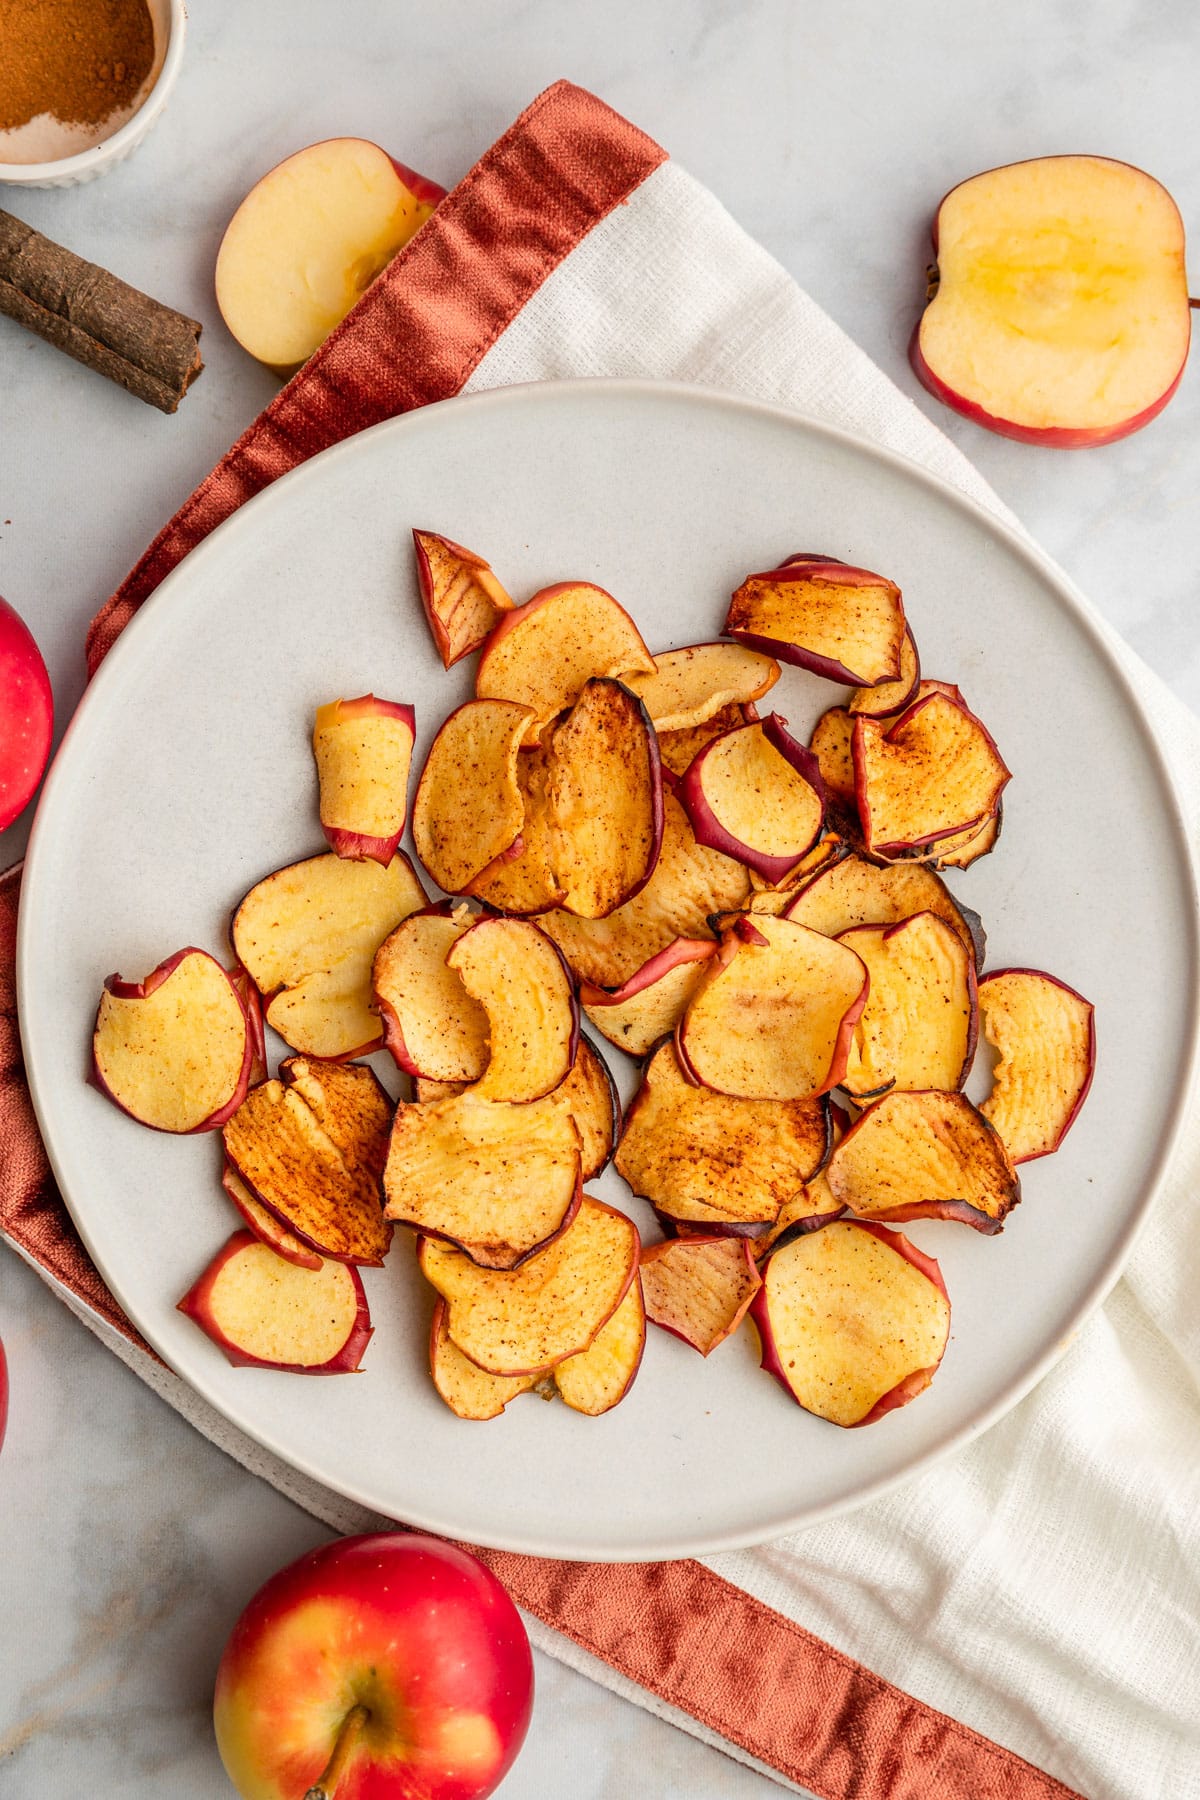 Dehydrated apples in air fryer